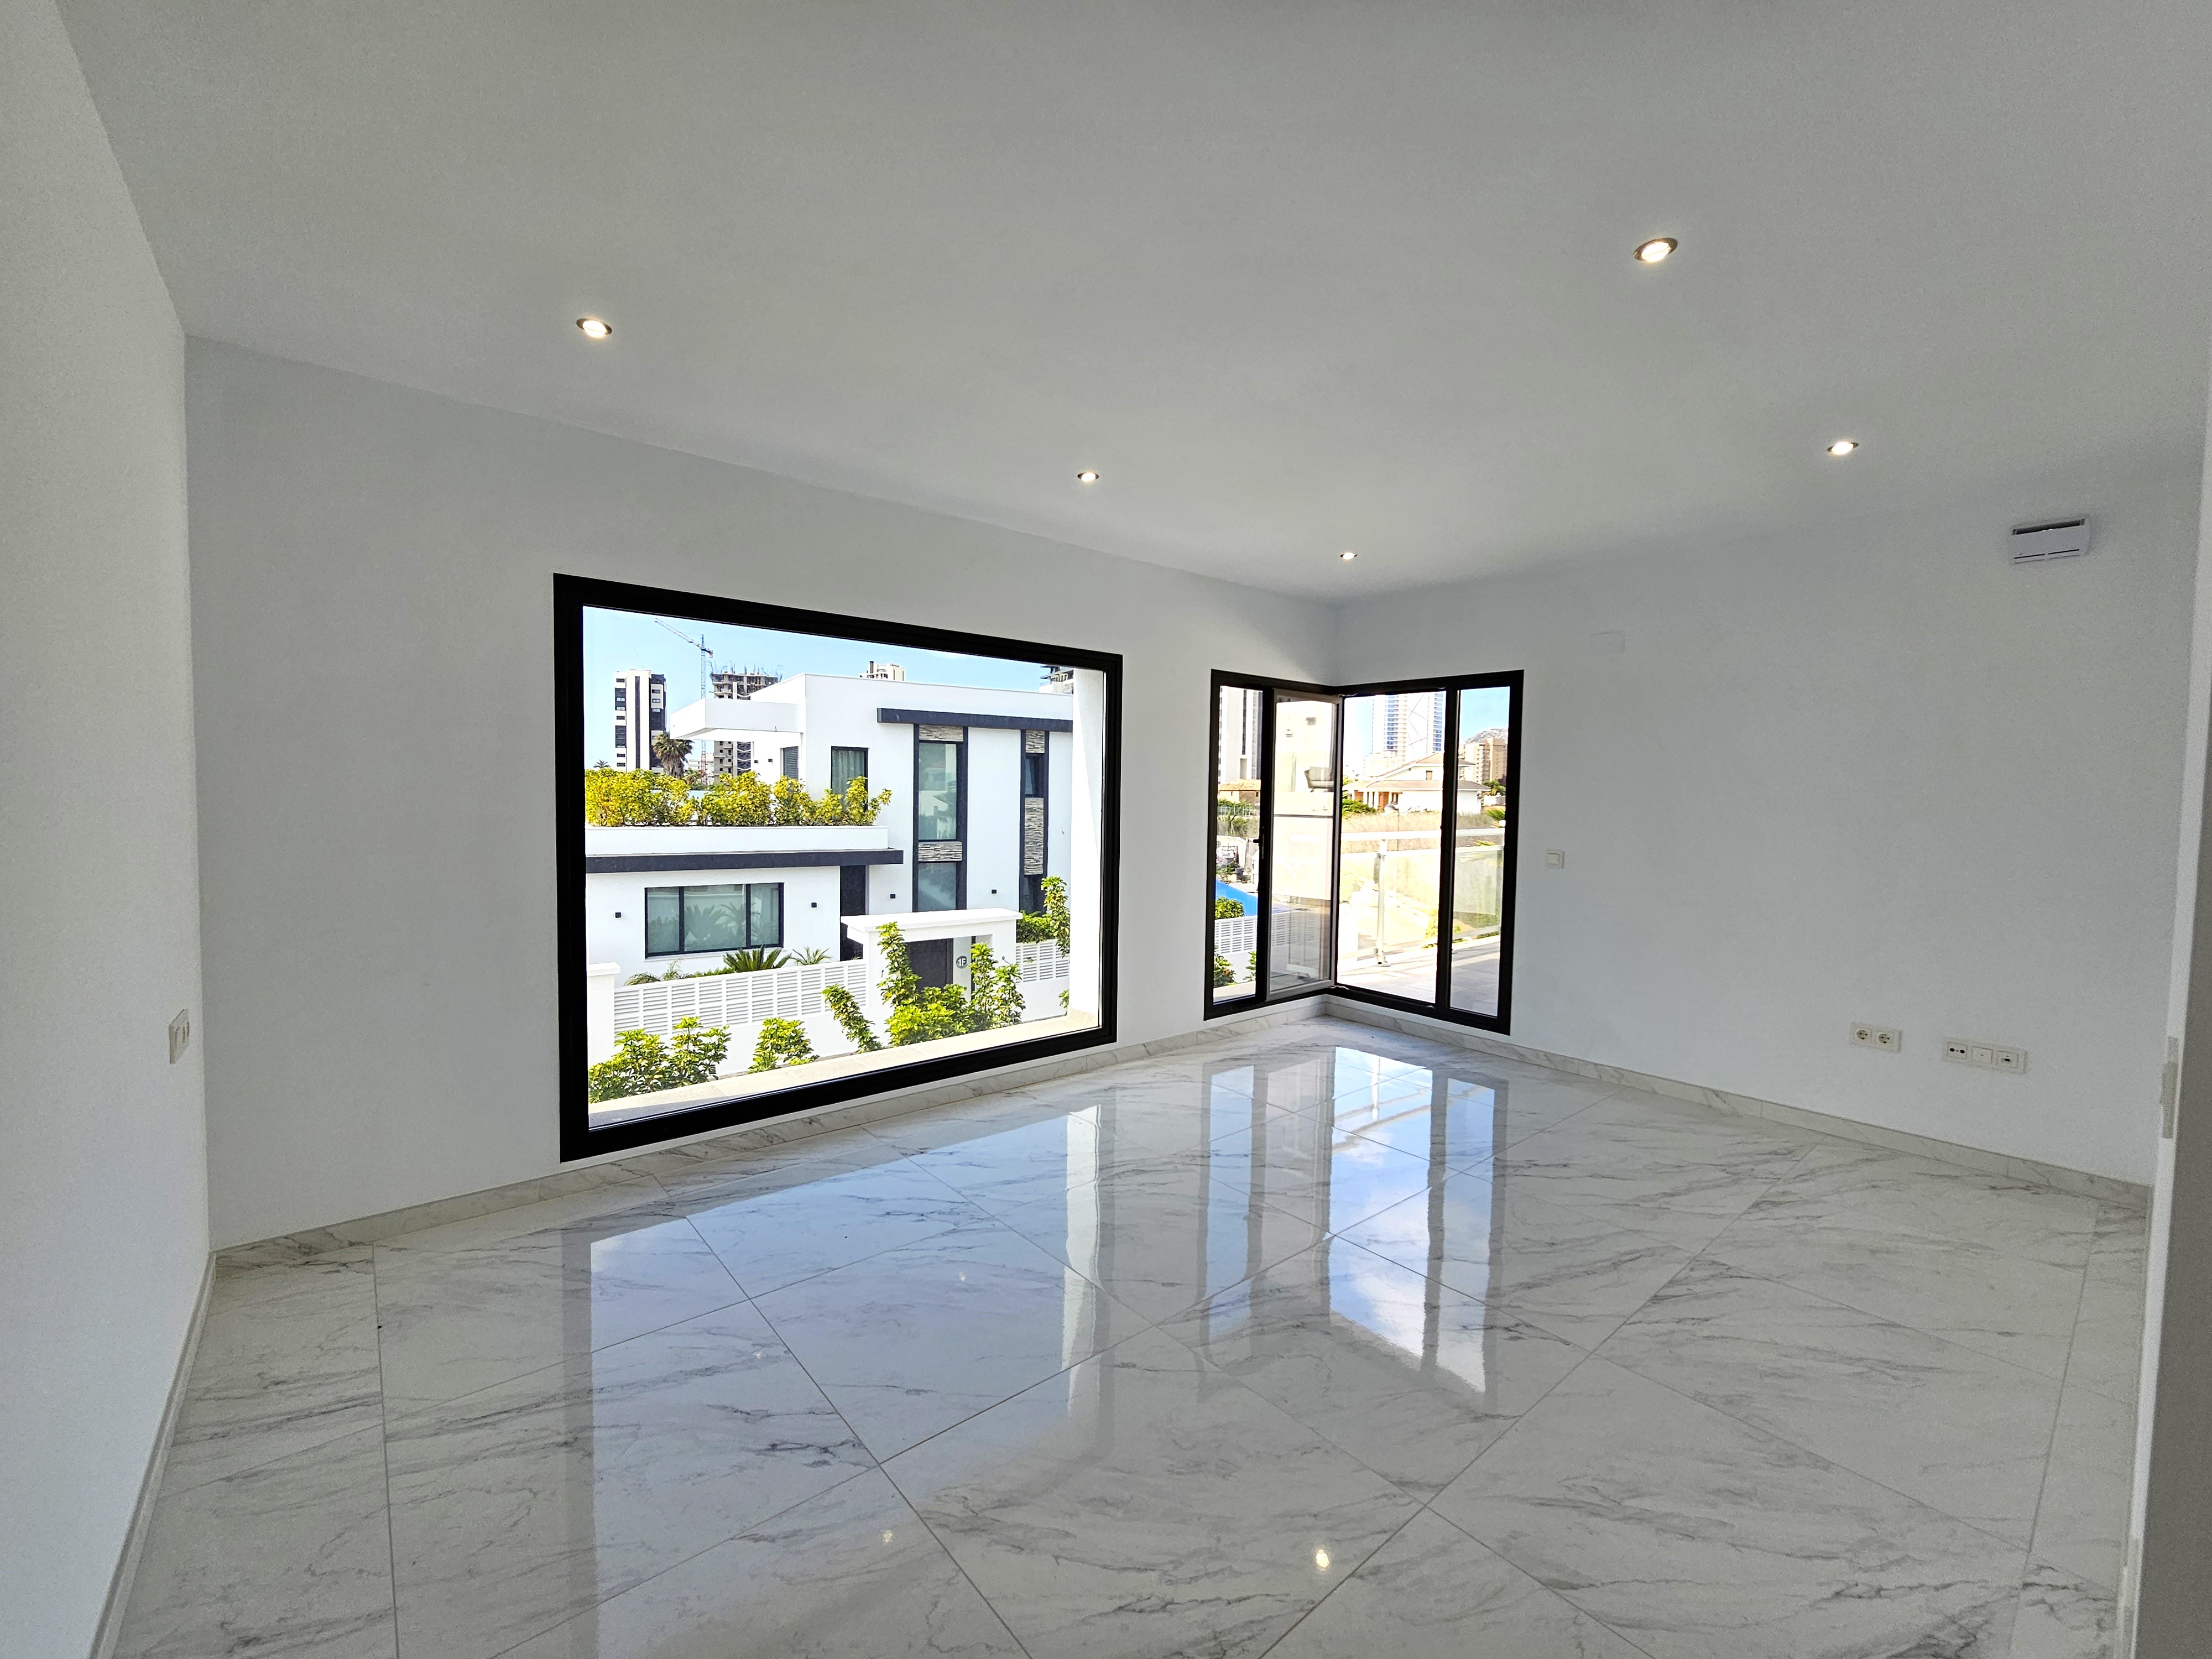 Modern villa in Calpe for sale, very well located